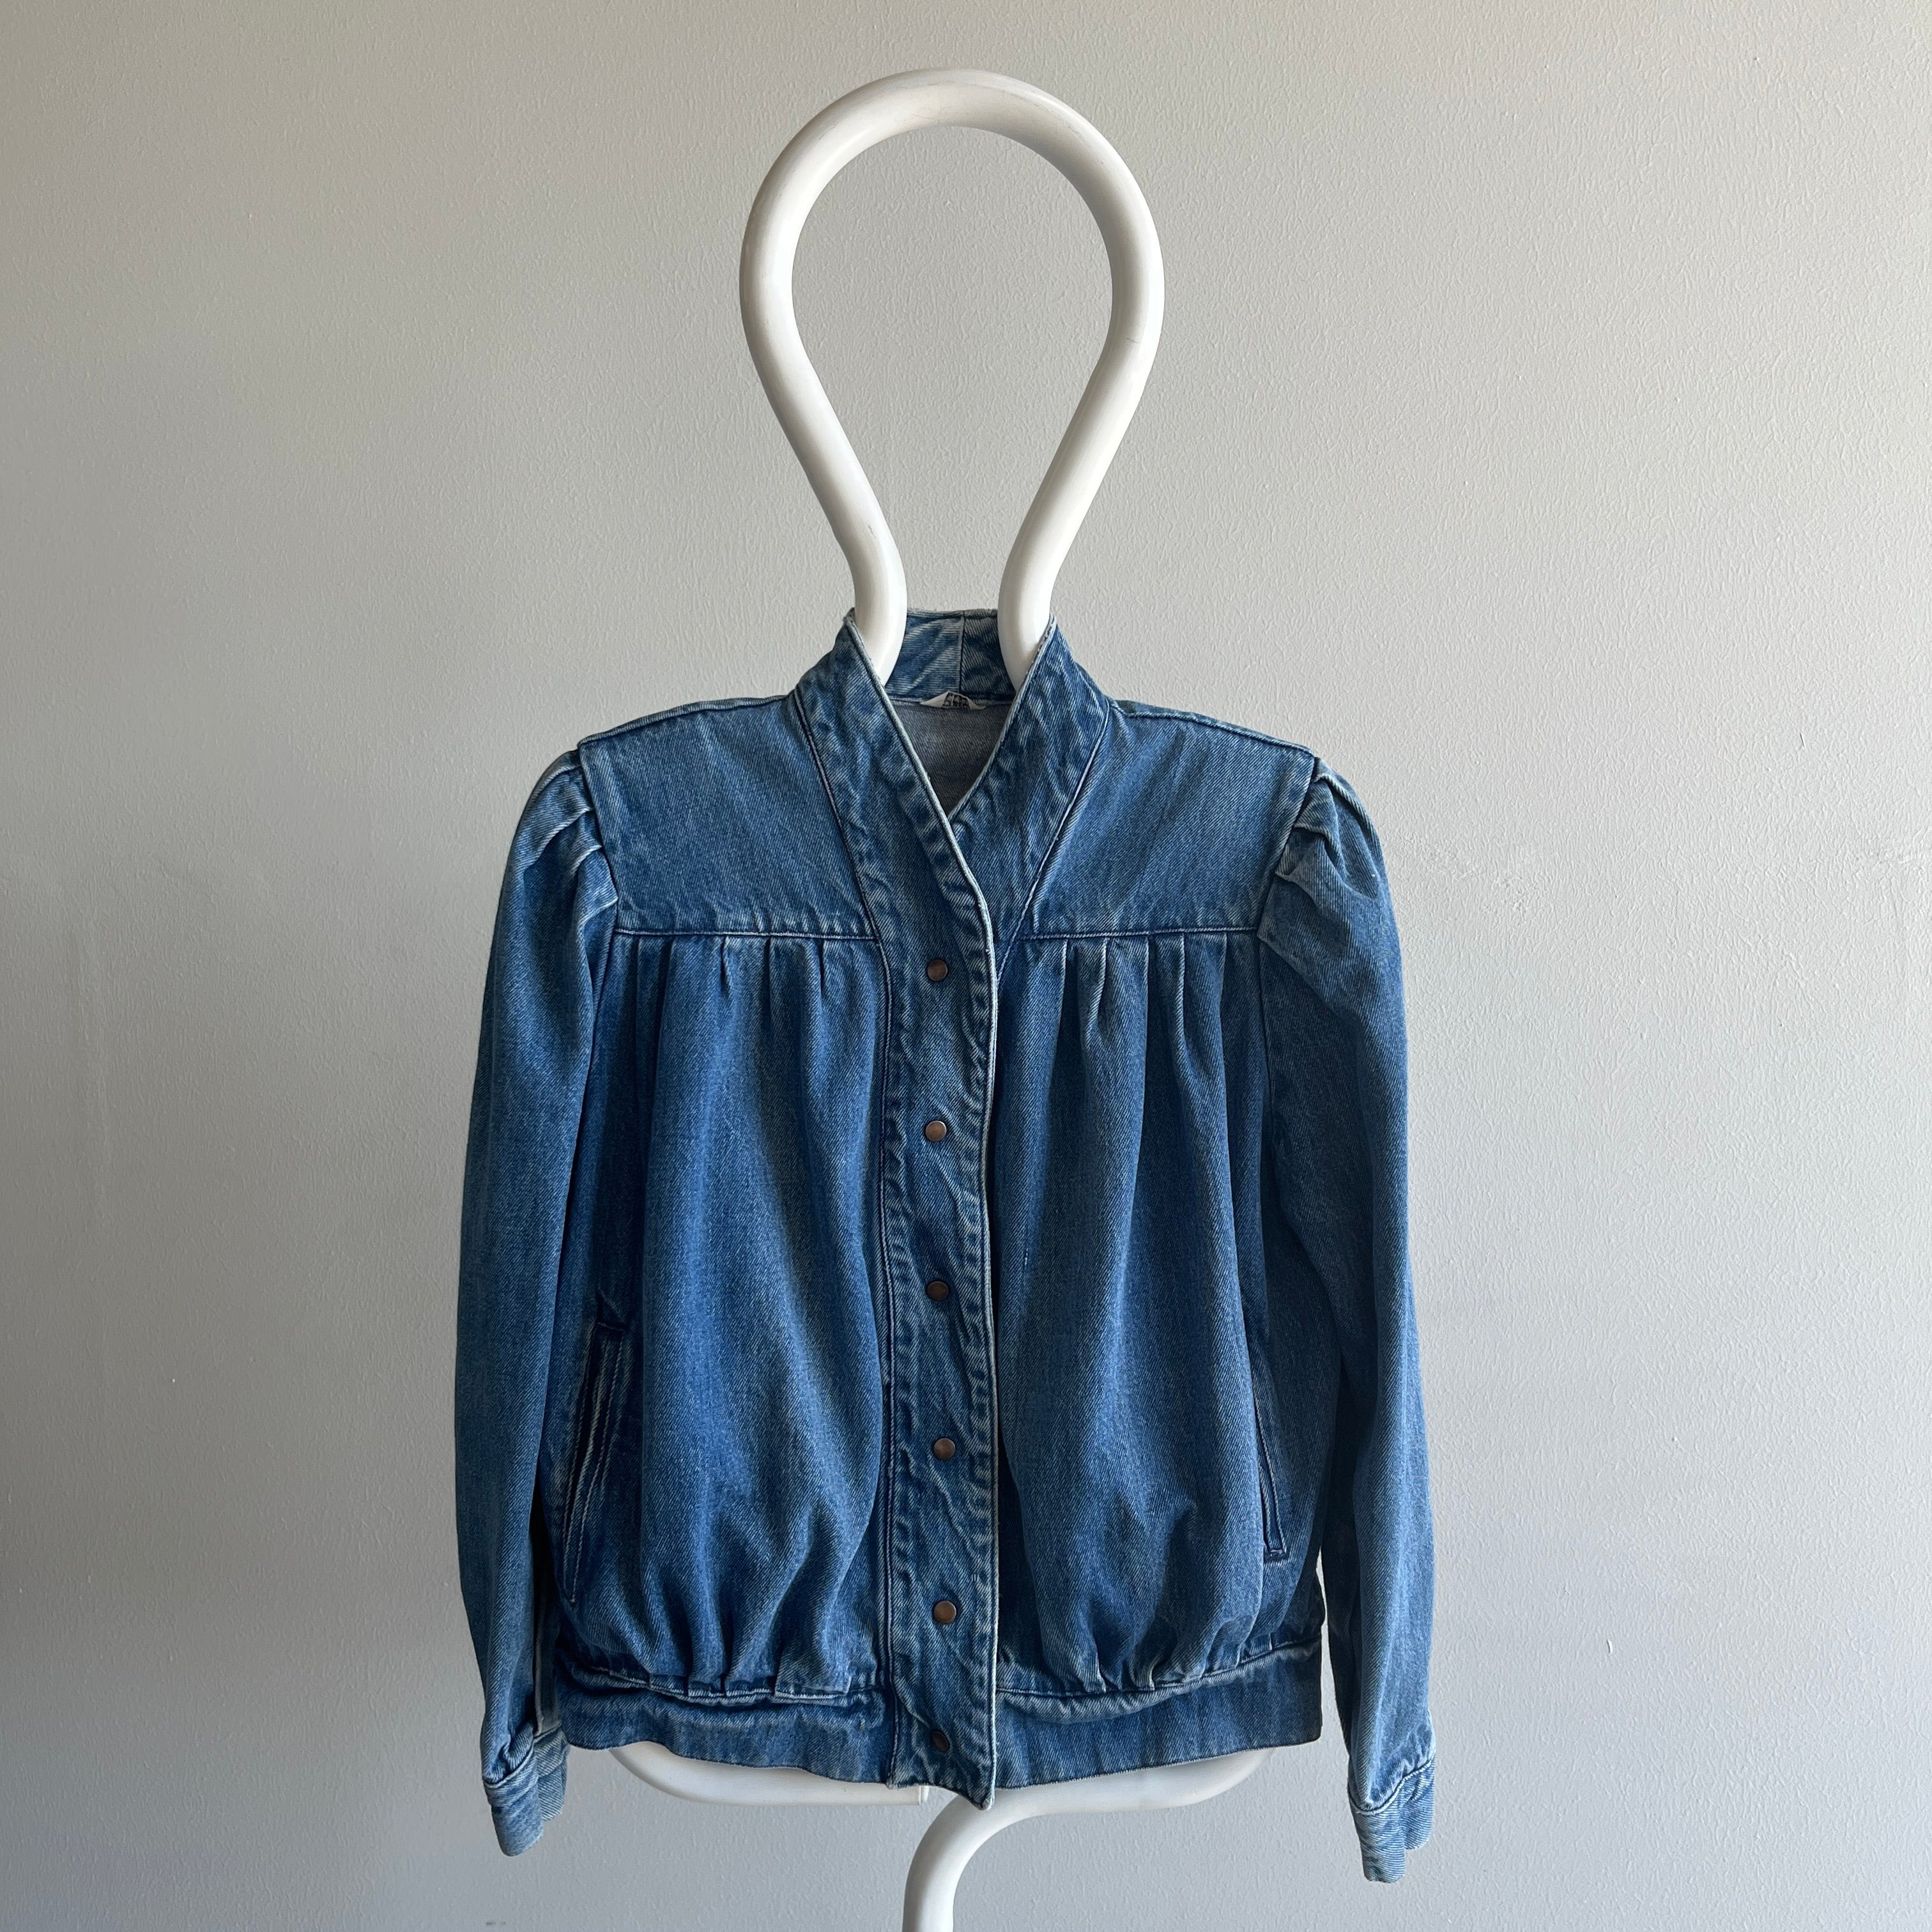 1980s Pleaded Denim Jacket with Snaps and.... SHOULDER PADS! Holy Moly!